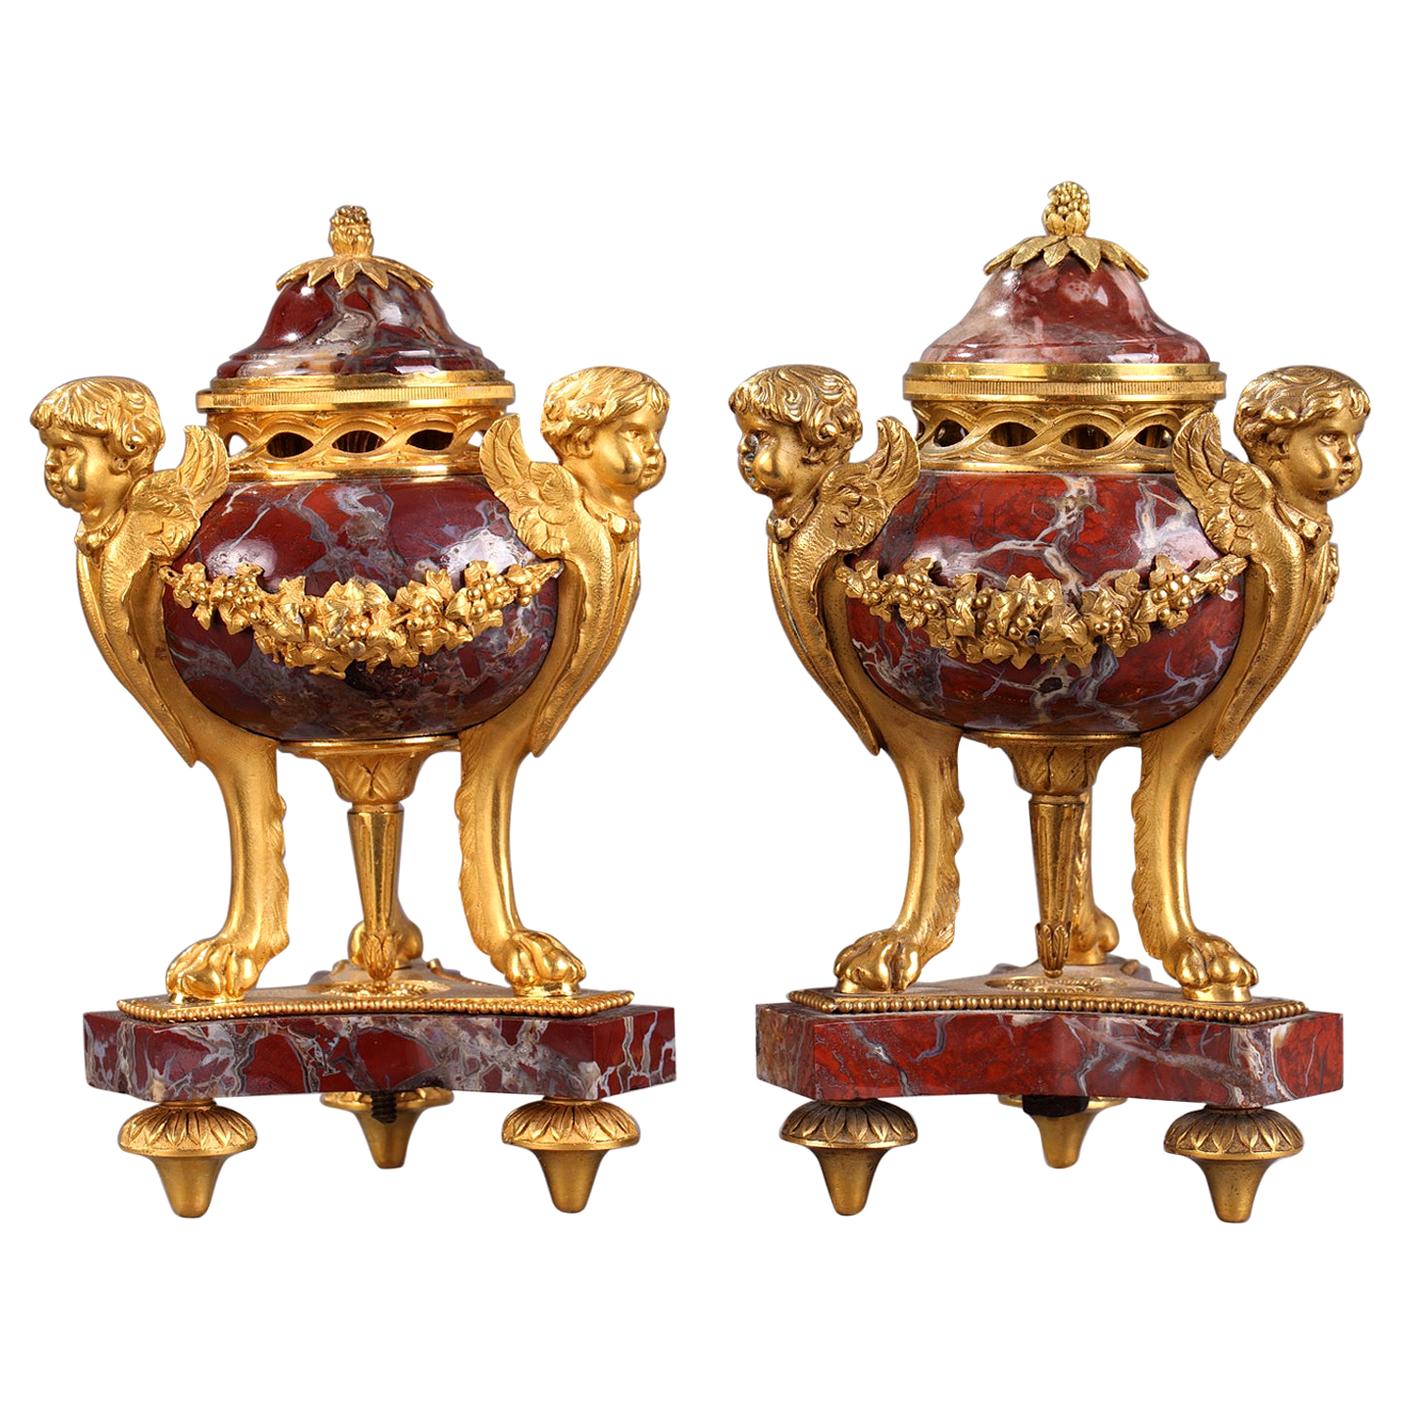 Pair of 19th Century Gilt Bronze and Marble Incense Burners